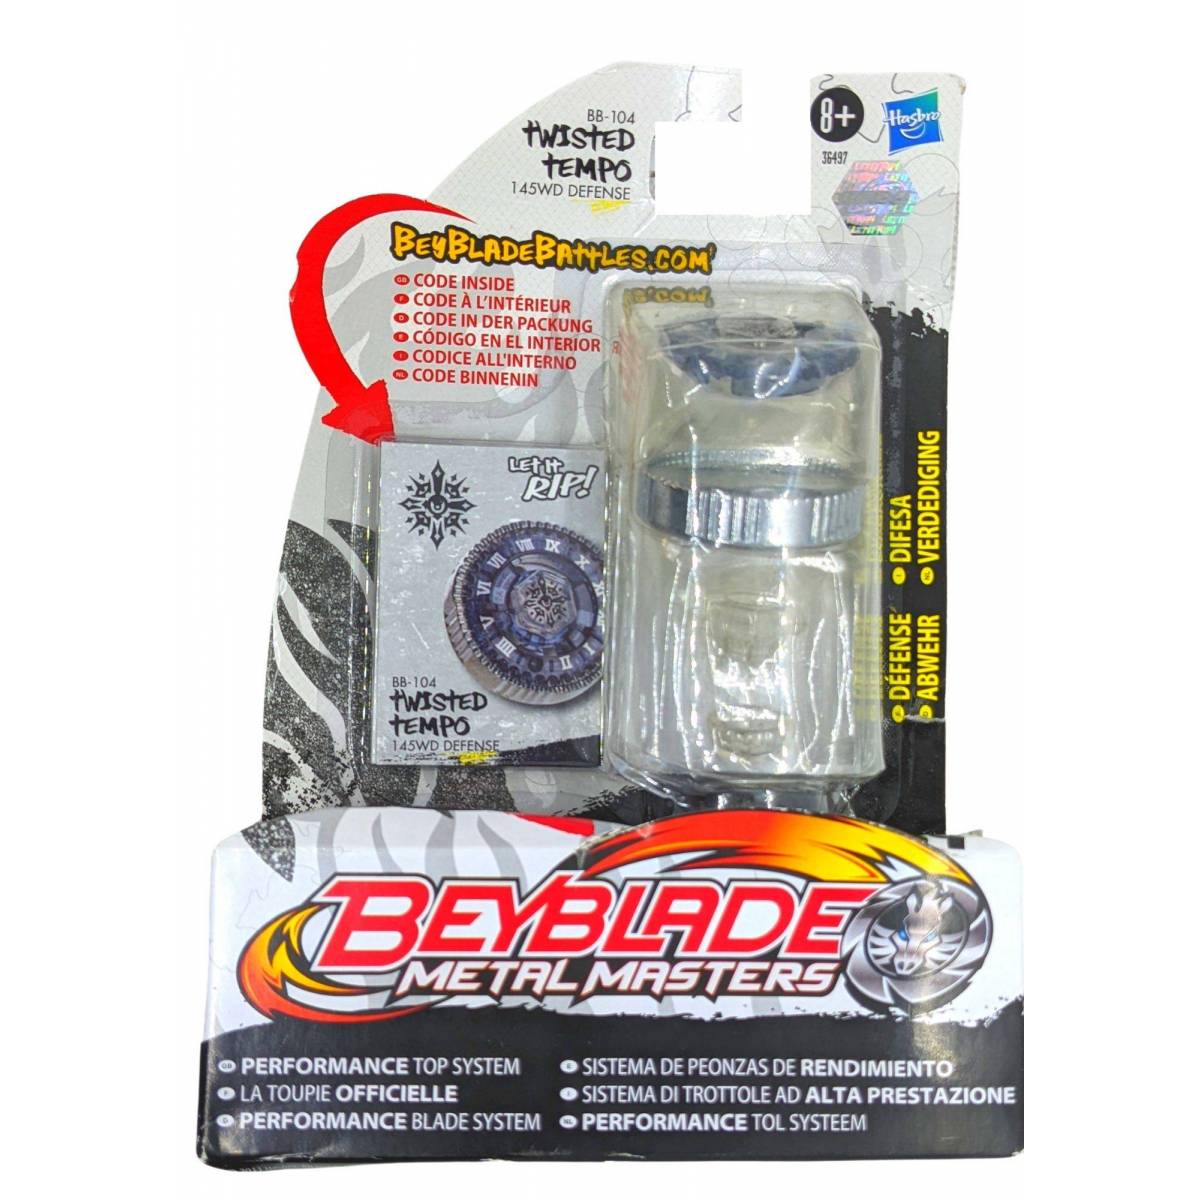 Beyblade Metal Masters Twisted Tempo BB-104 Spinning Top